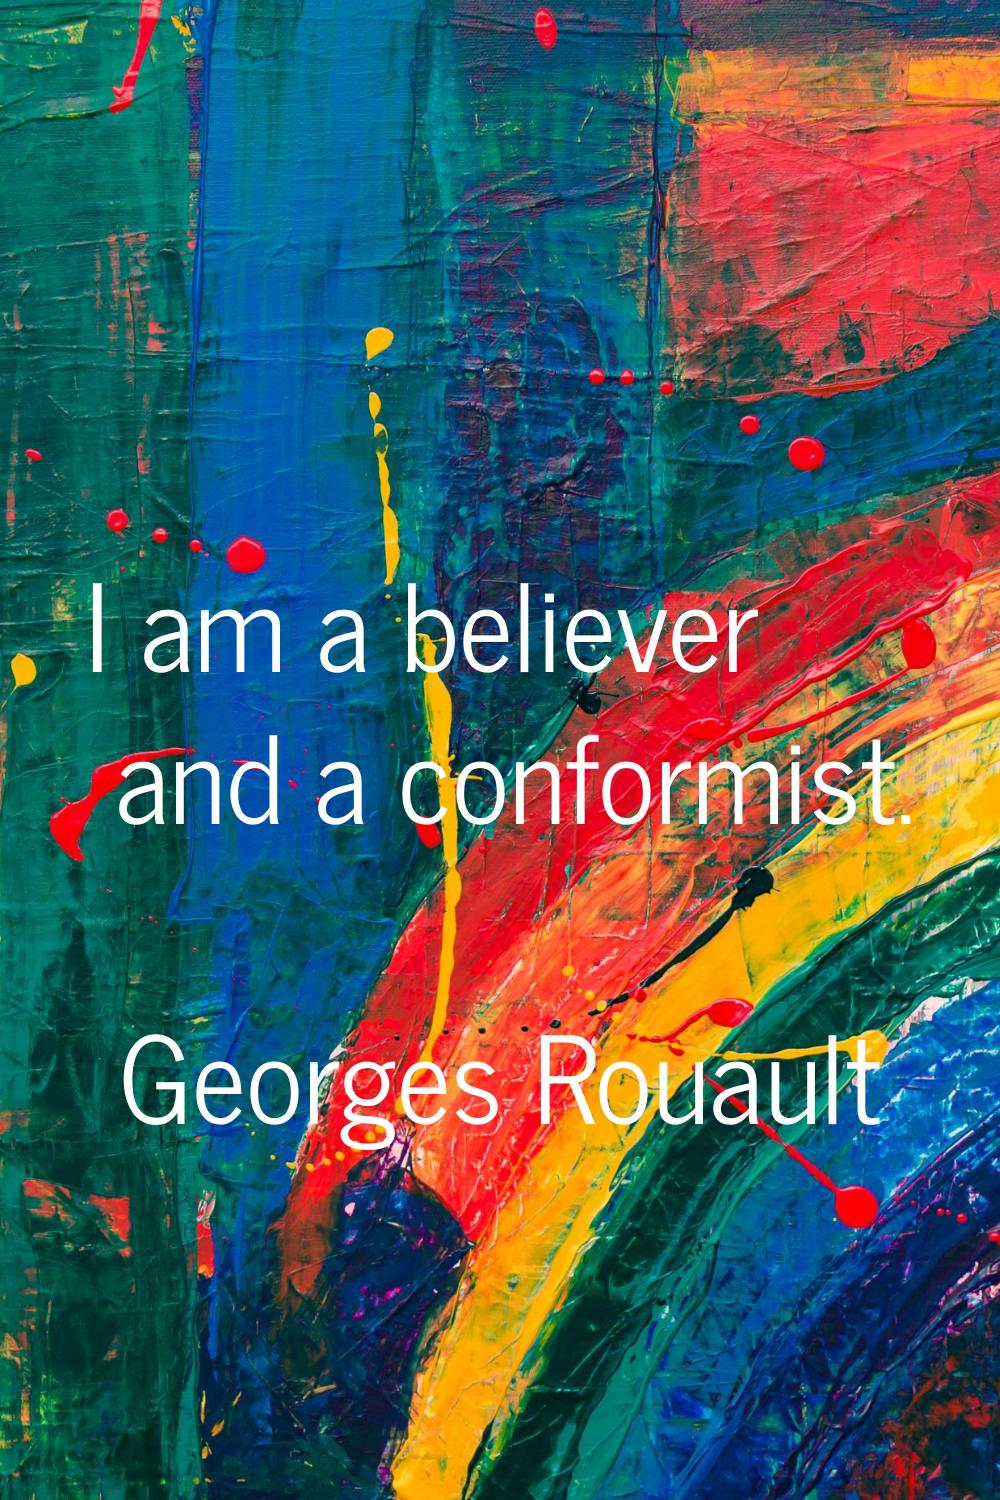 I am a believer and a conformist.